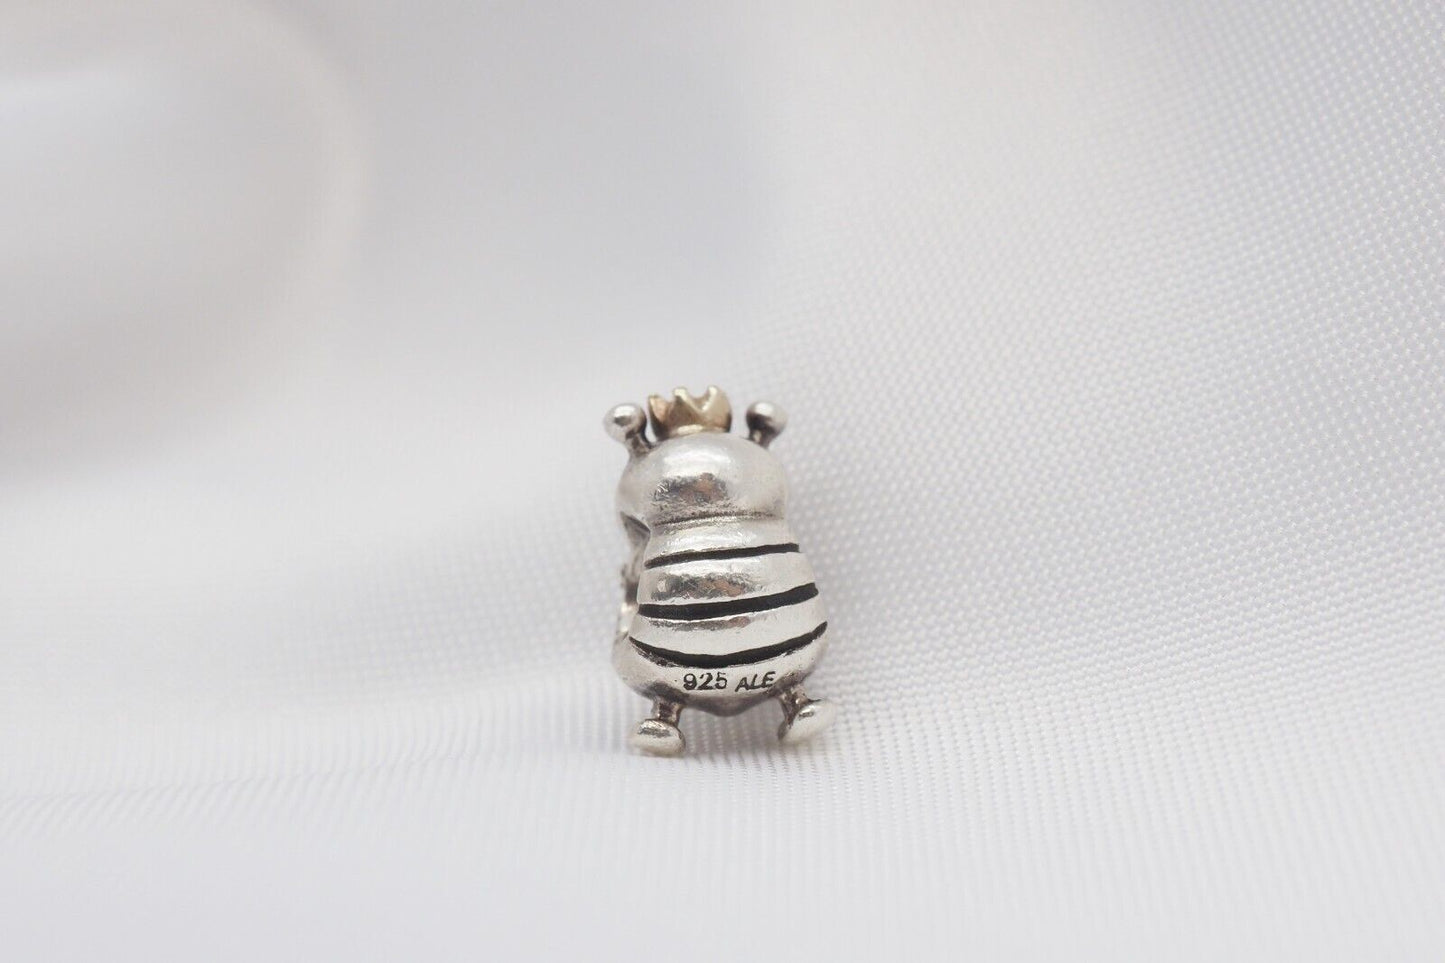 Pandora Sterling Silver 790227 Queen Bee Charm